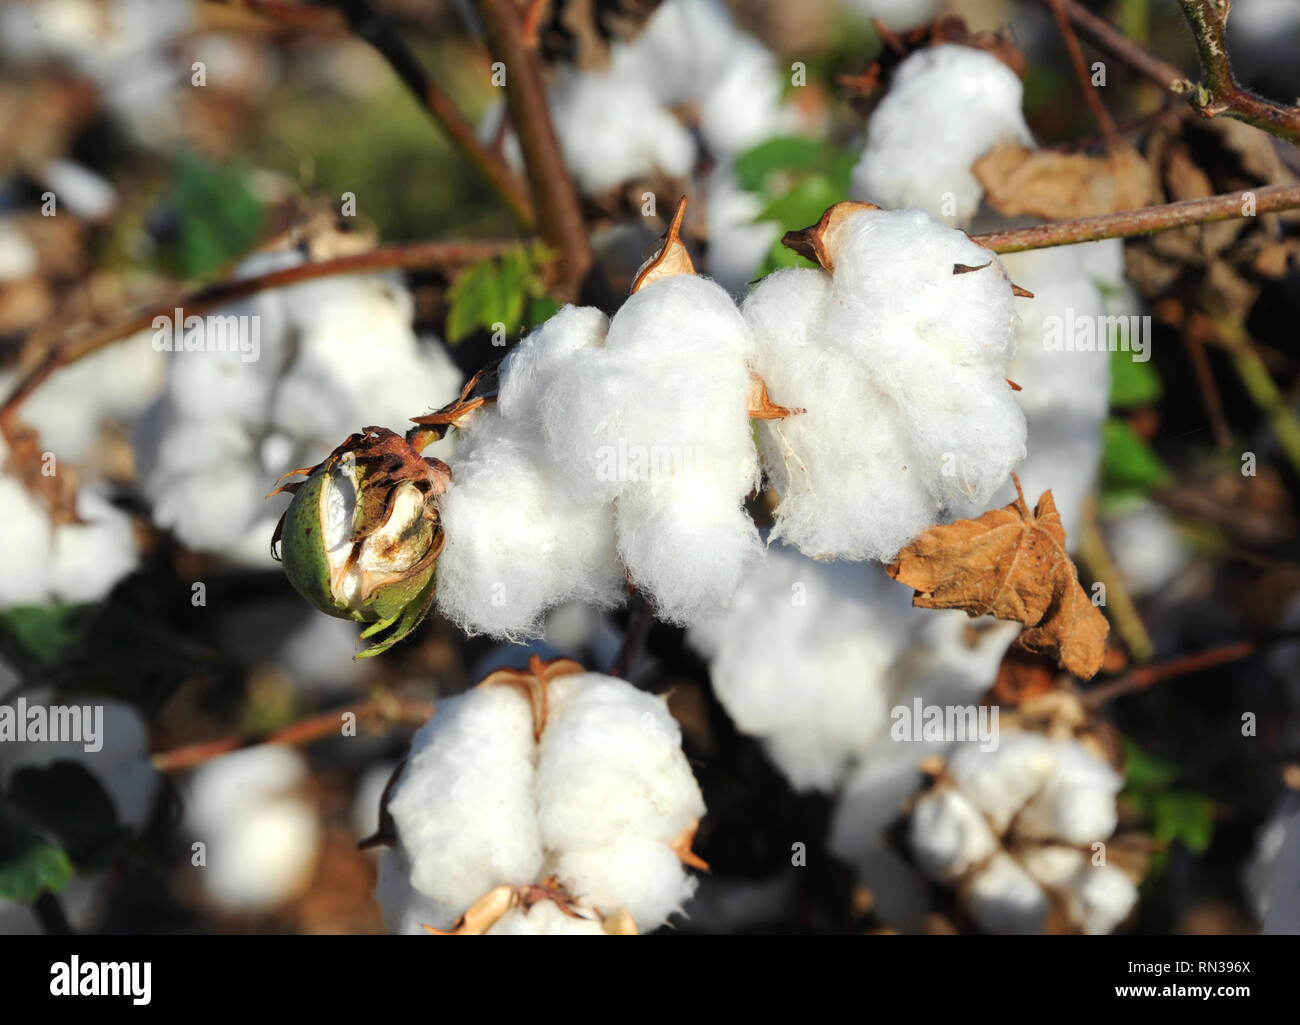 Closeup image shows a cotton boll still in the bud.  It is beginning to open up.  Plant also has cotton bolls at maturity. Stock Photo